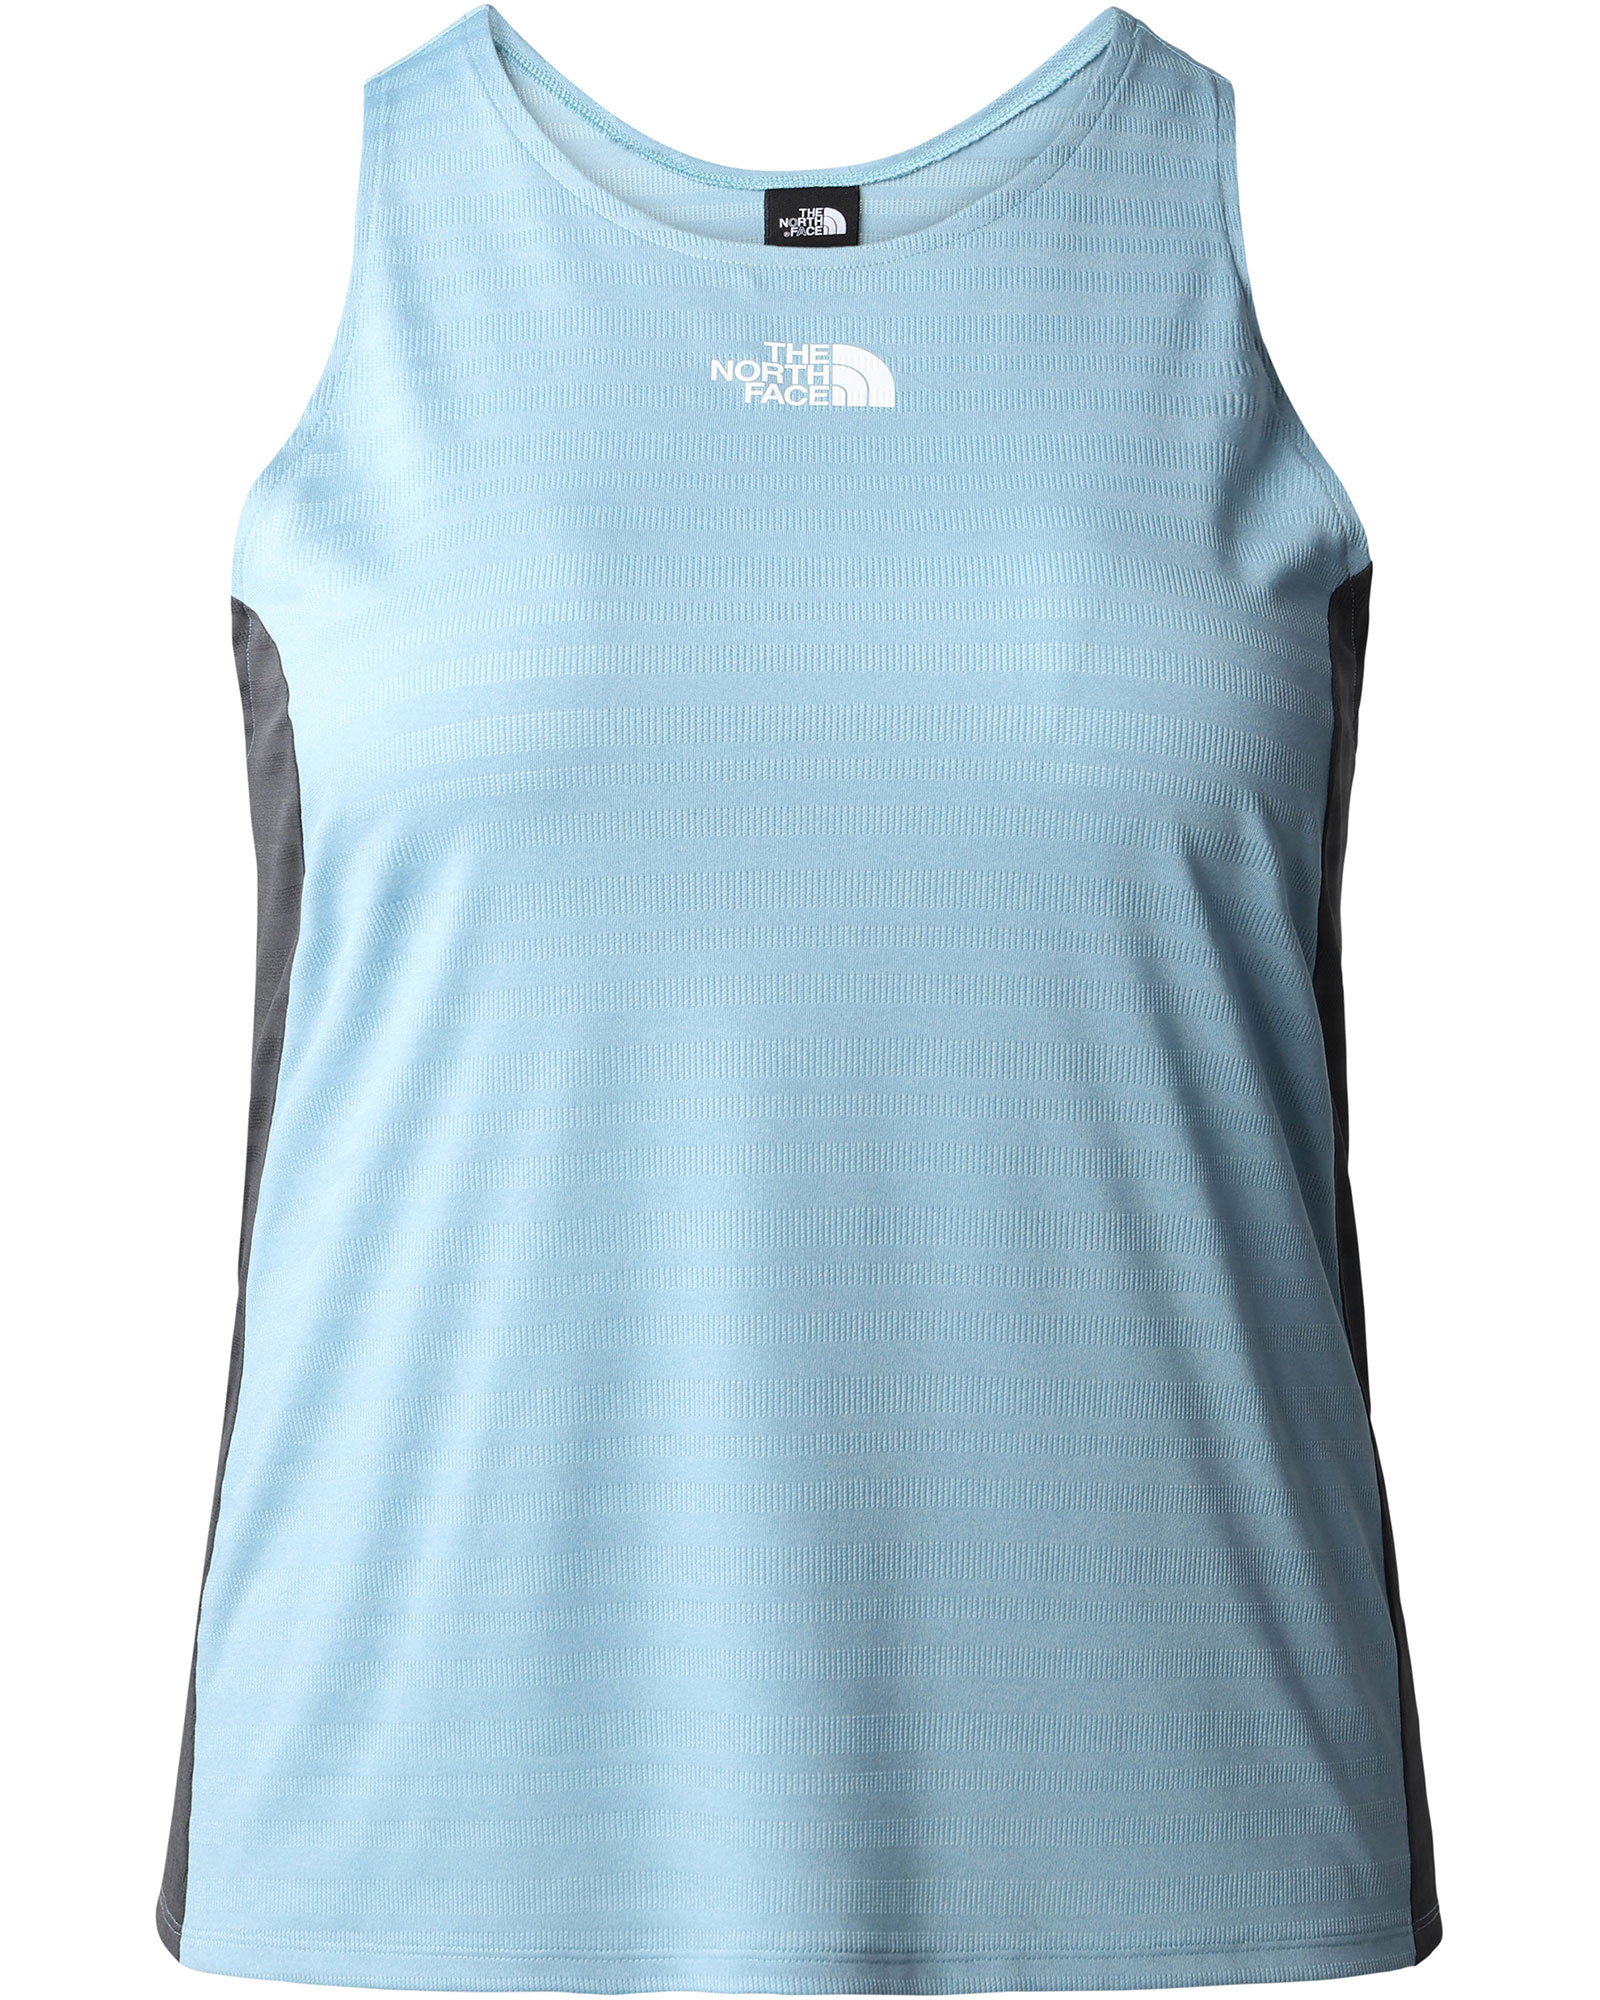 The North Face Women’s Plus MA Tank - Reef Waters 3X